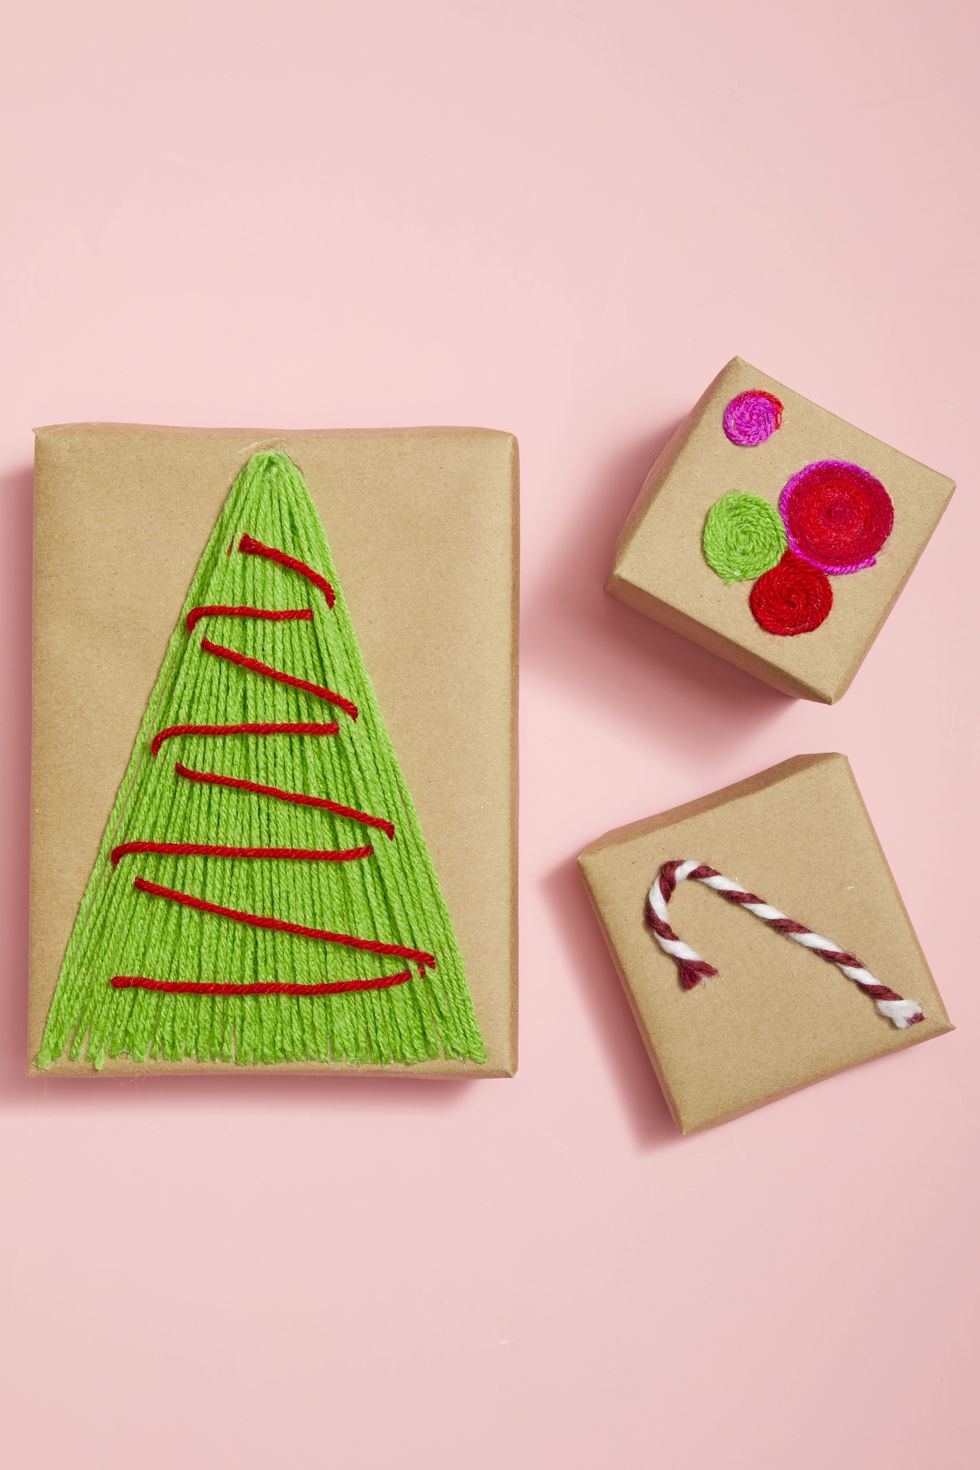 https://hips.hearstapps.com/hmg-prod/images/gift-wrapping-ideas-christmas-tree-yarn-gift-toppers-1634093732.jpeg?crop=0.8079728583545378xw:1xh;center,top&resize=980:*